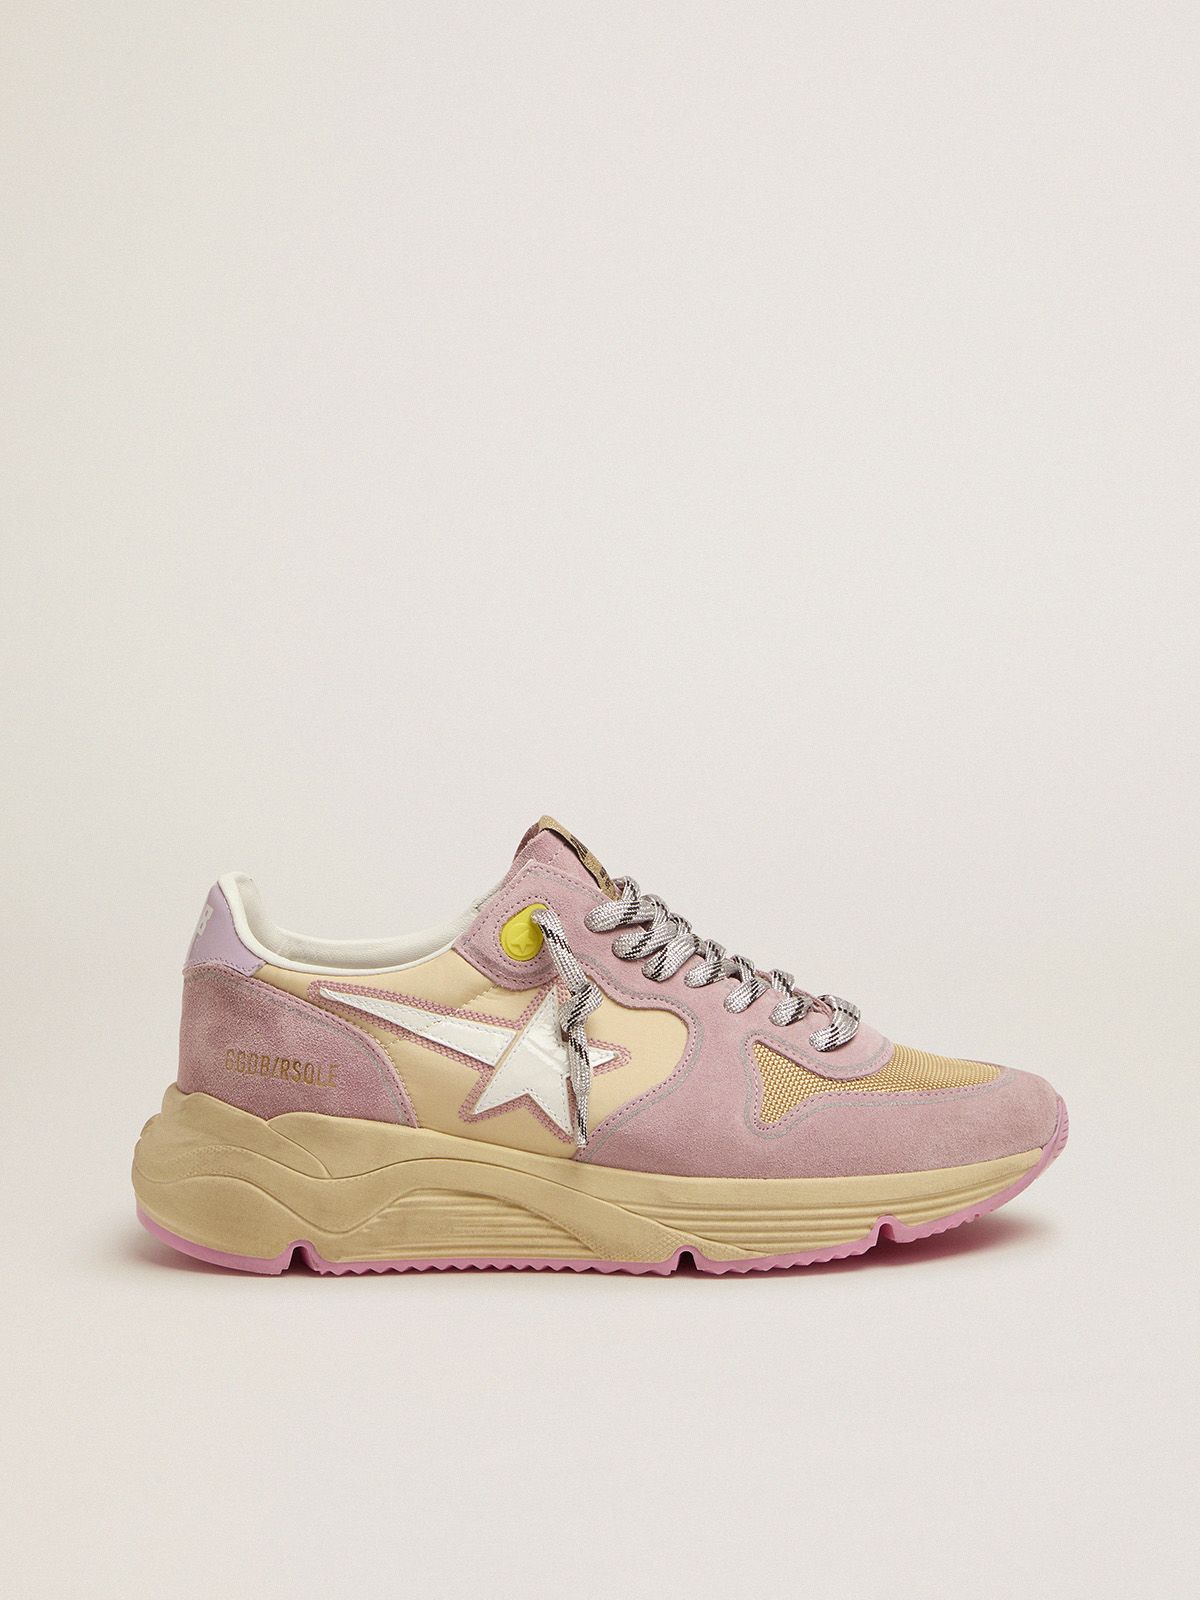 golden goose pink sneakers with Running star Sole Pastel white